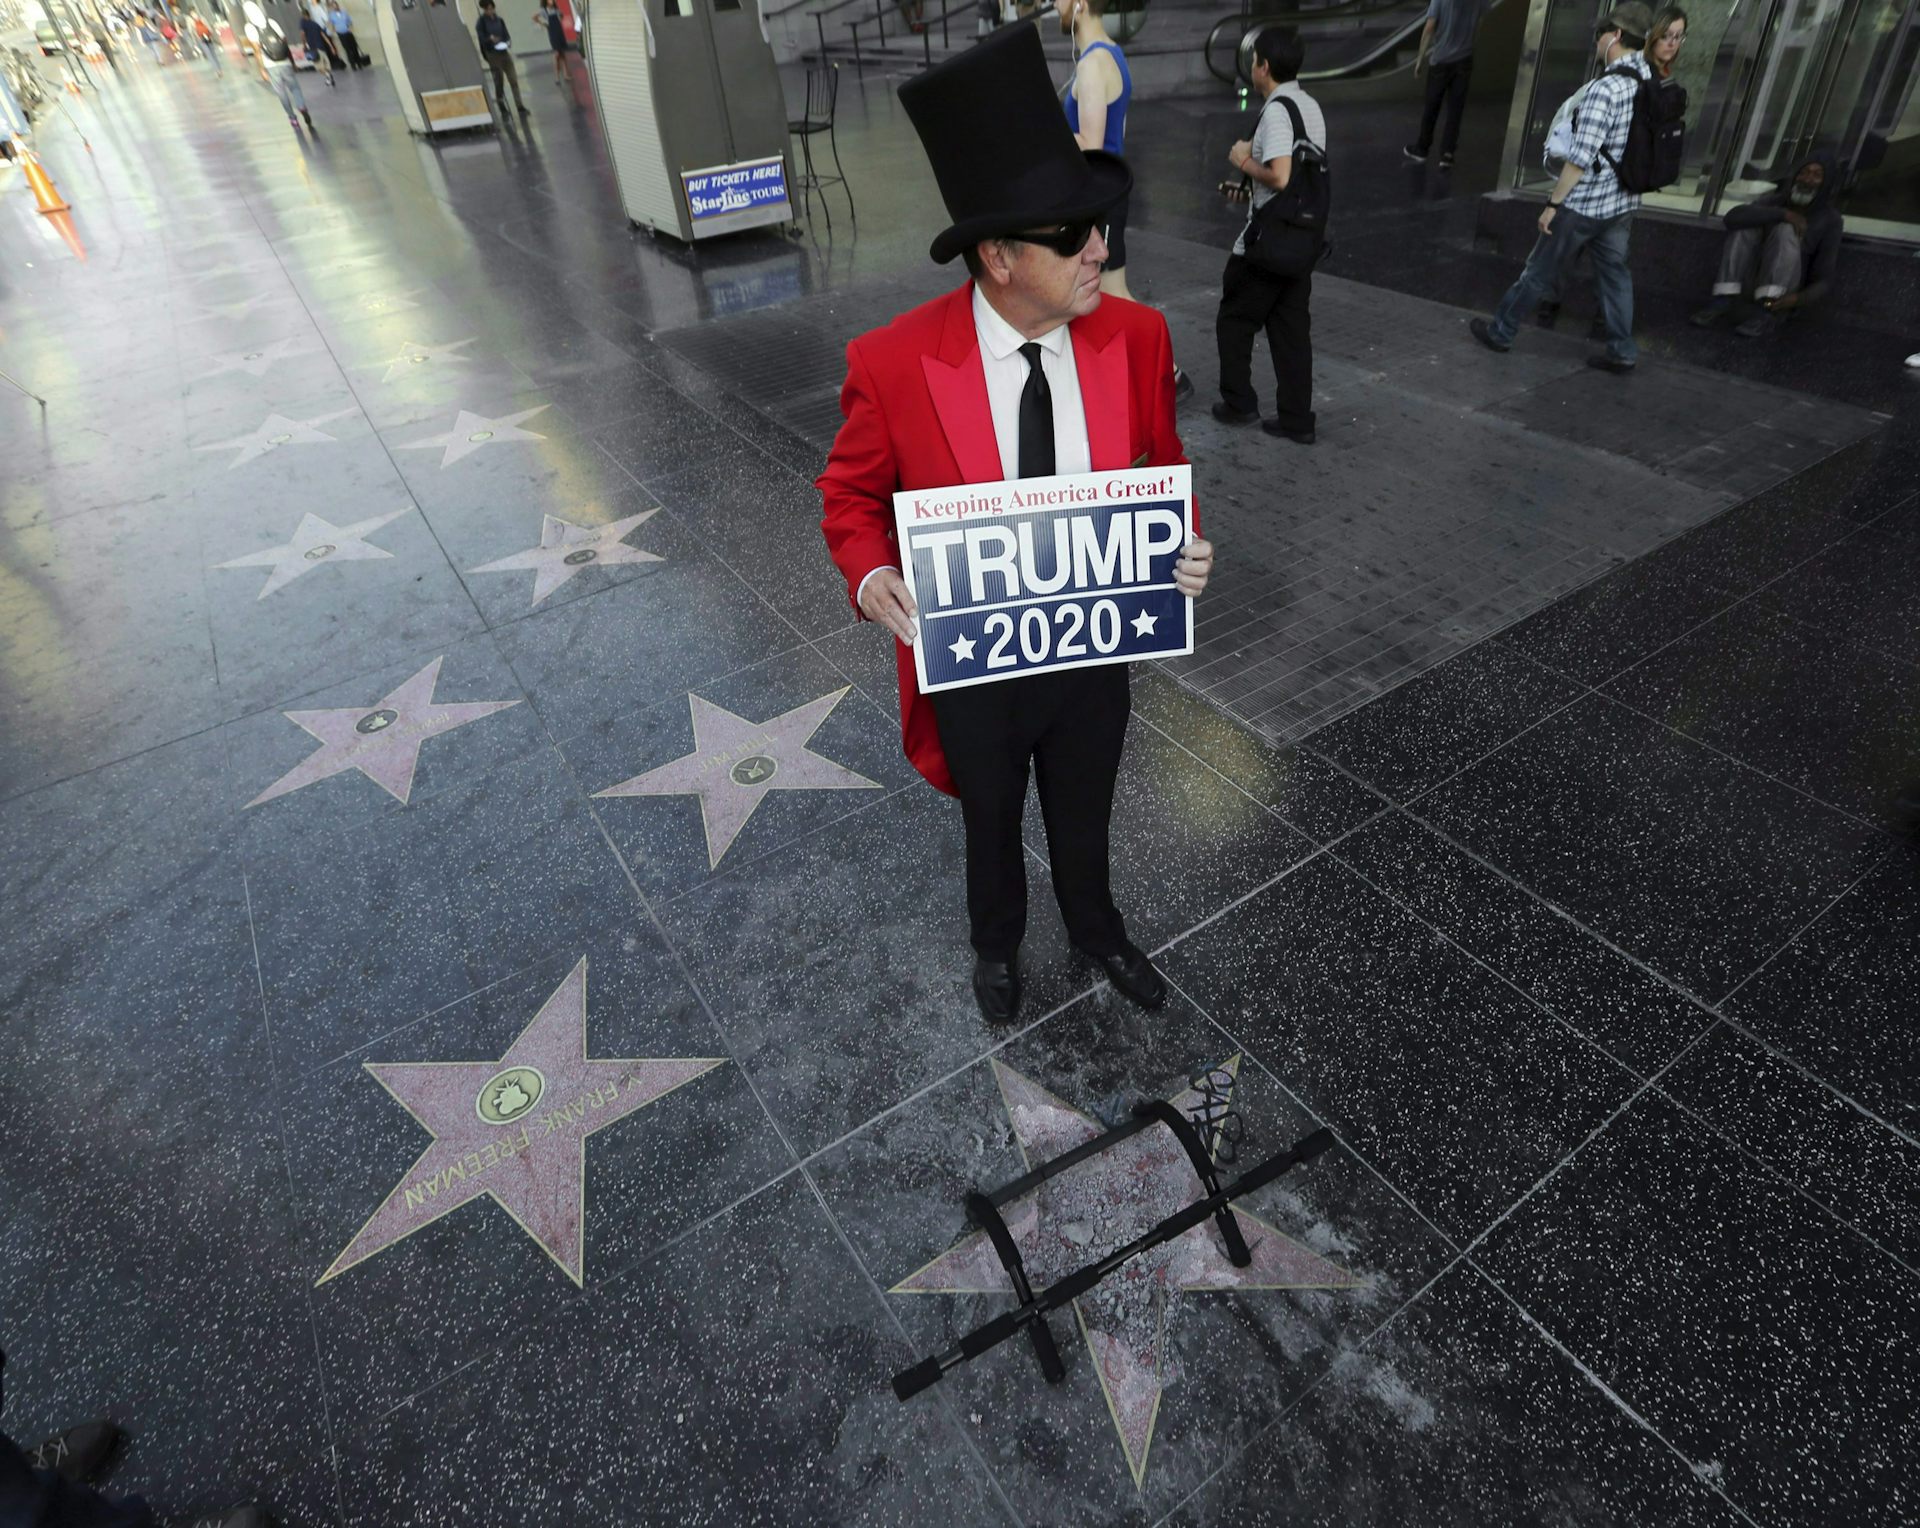 A Trump supporter carrying a Trump 2020 sign stands near the president's vandalized star on the Hollywood Walk of Fame.